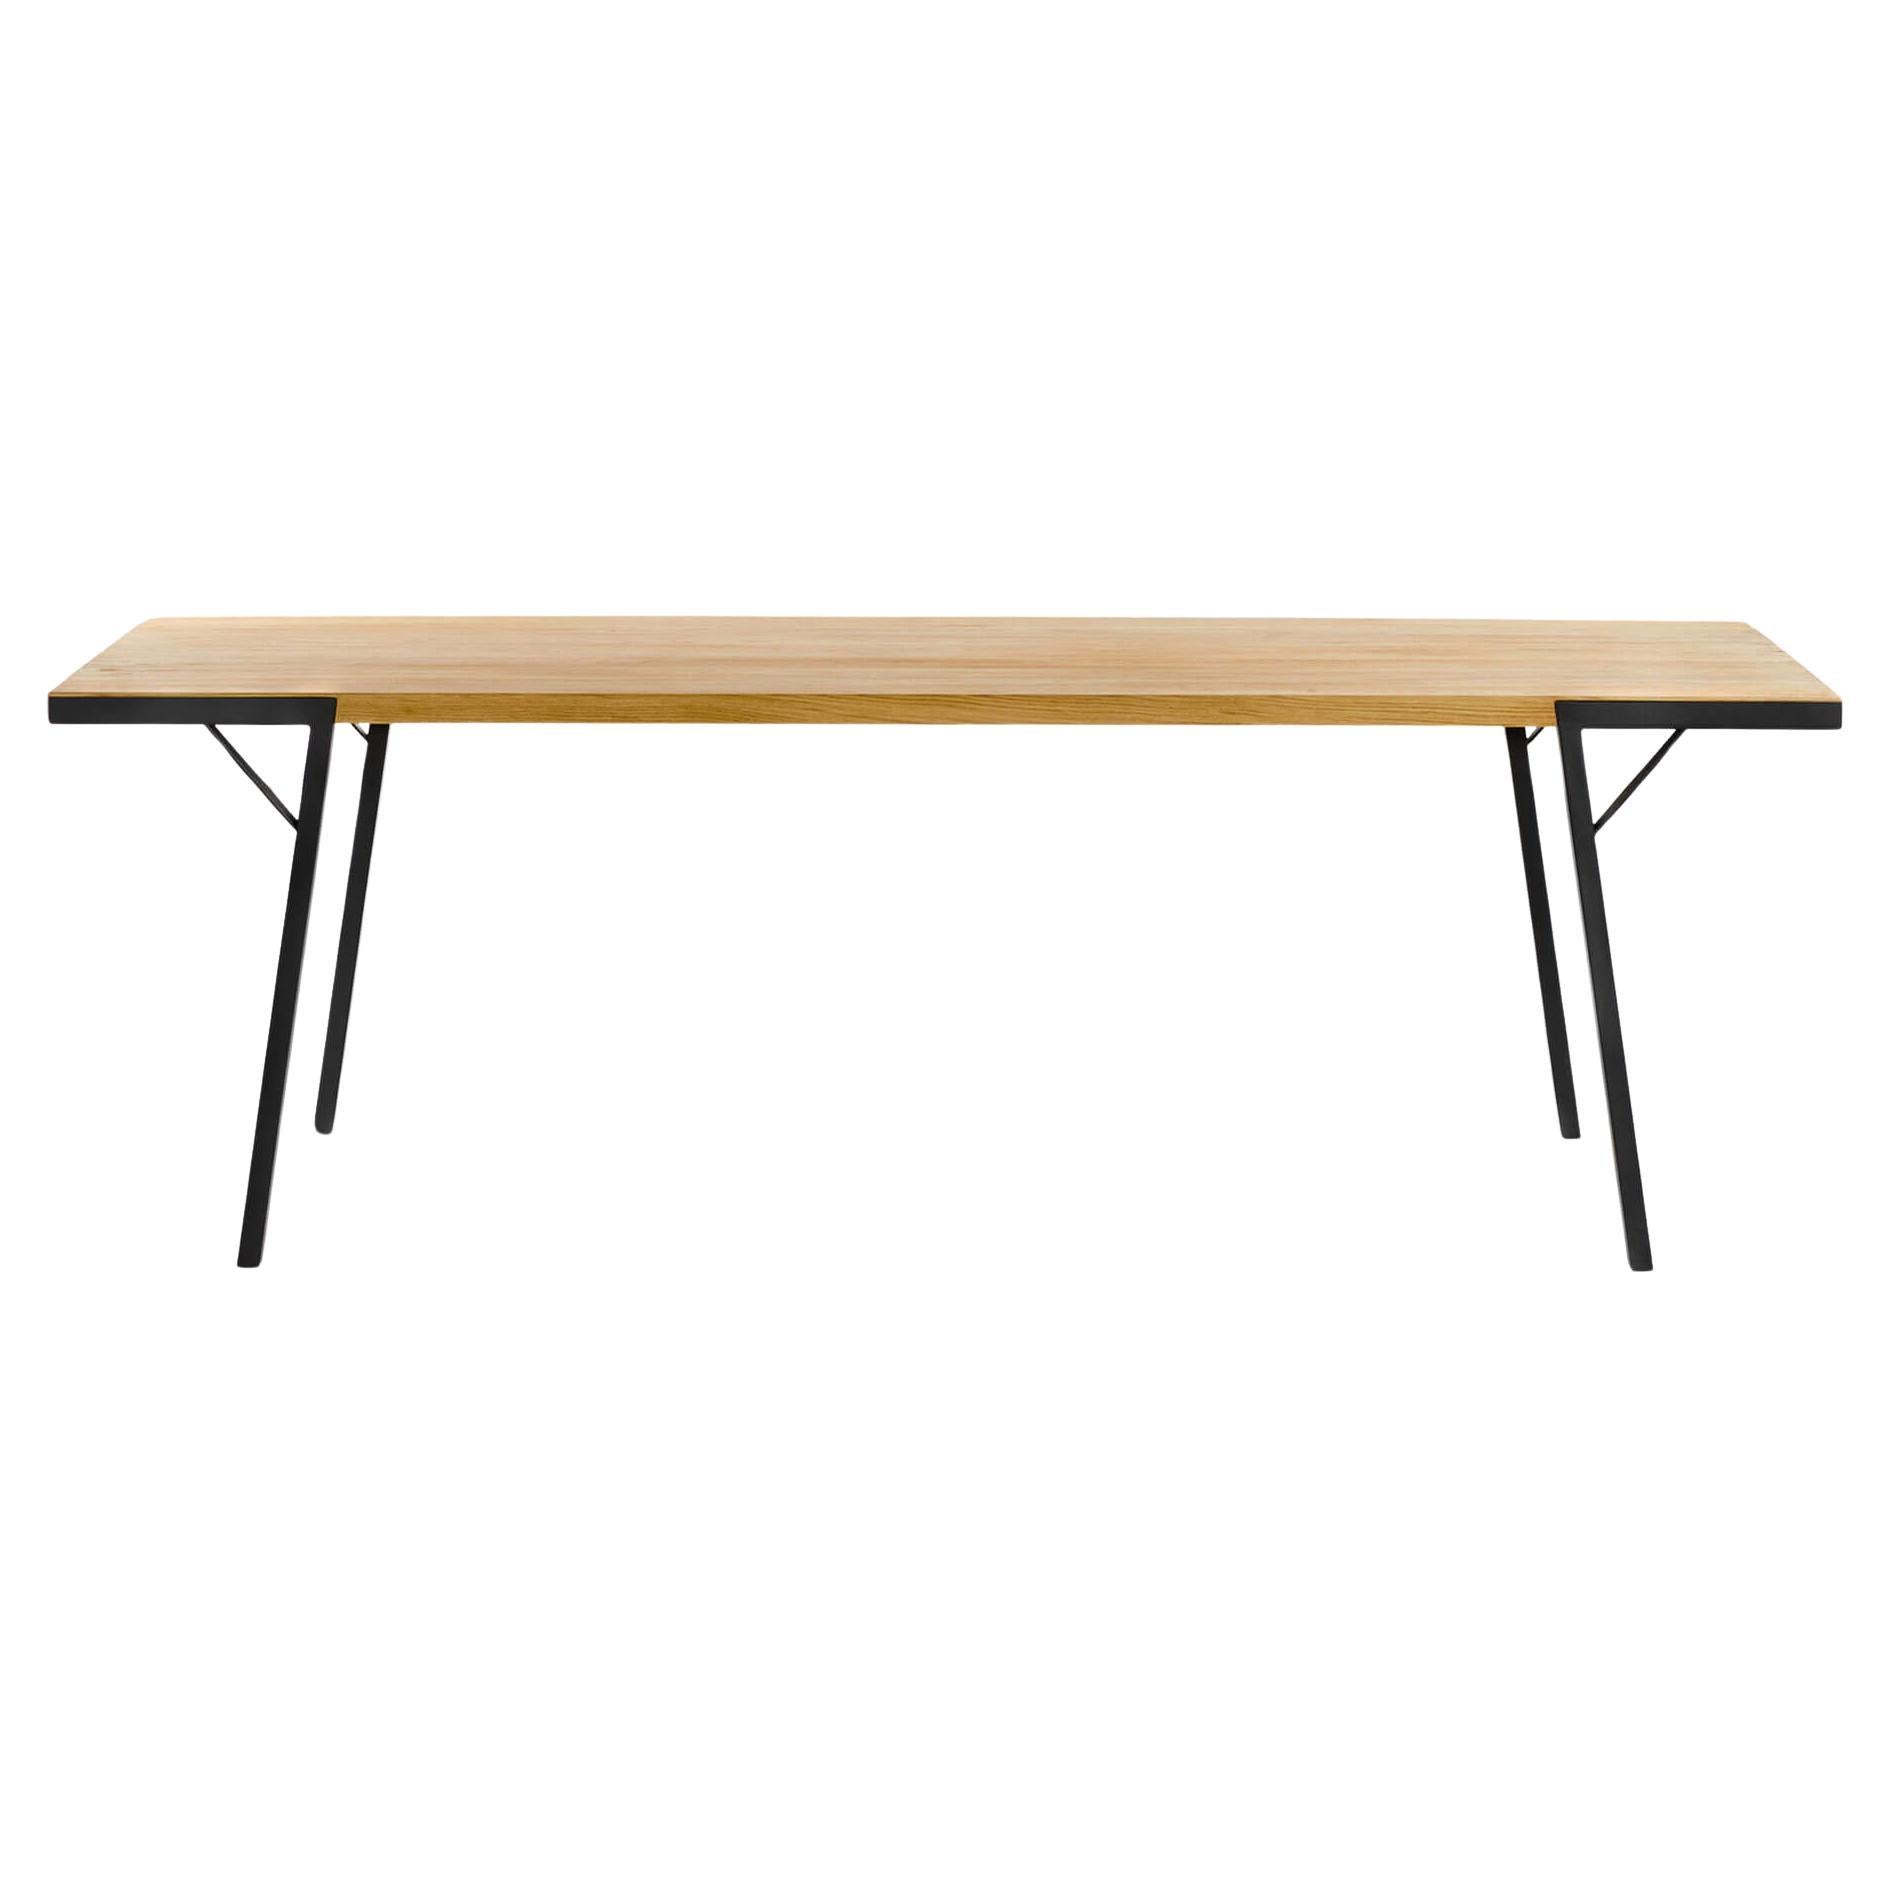 Oak Natur Frame Dining Table M by Milla & Milli